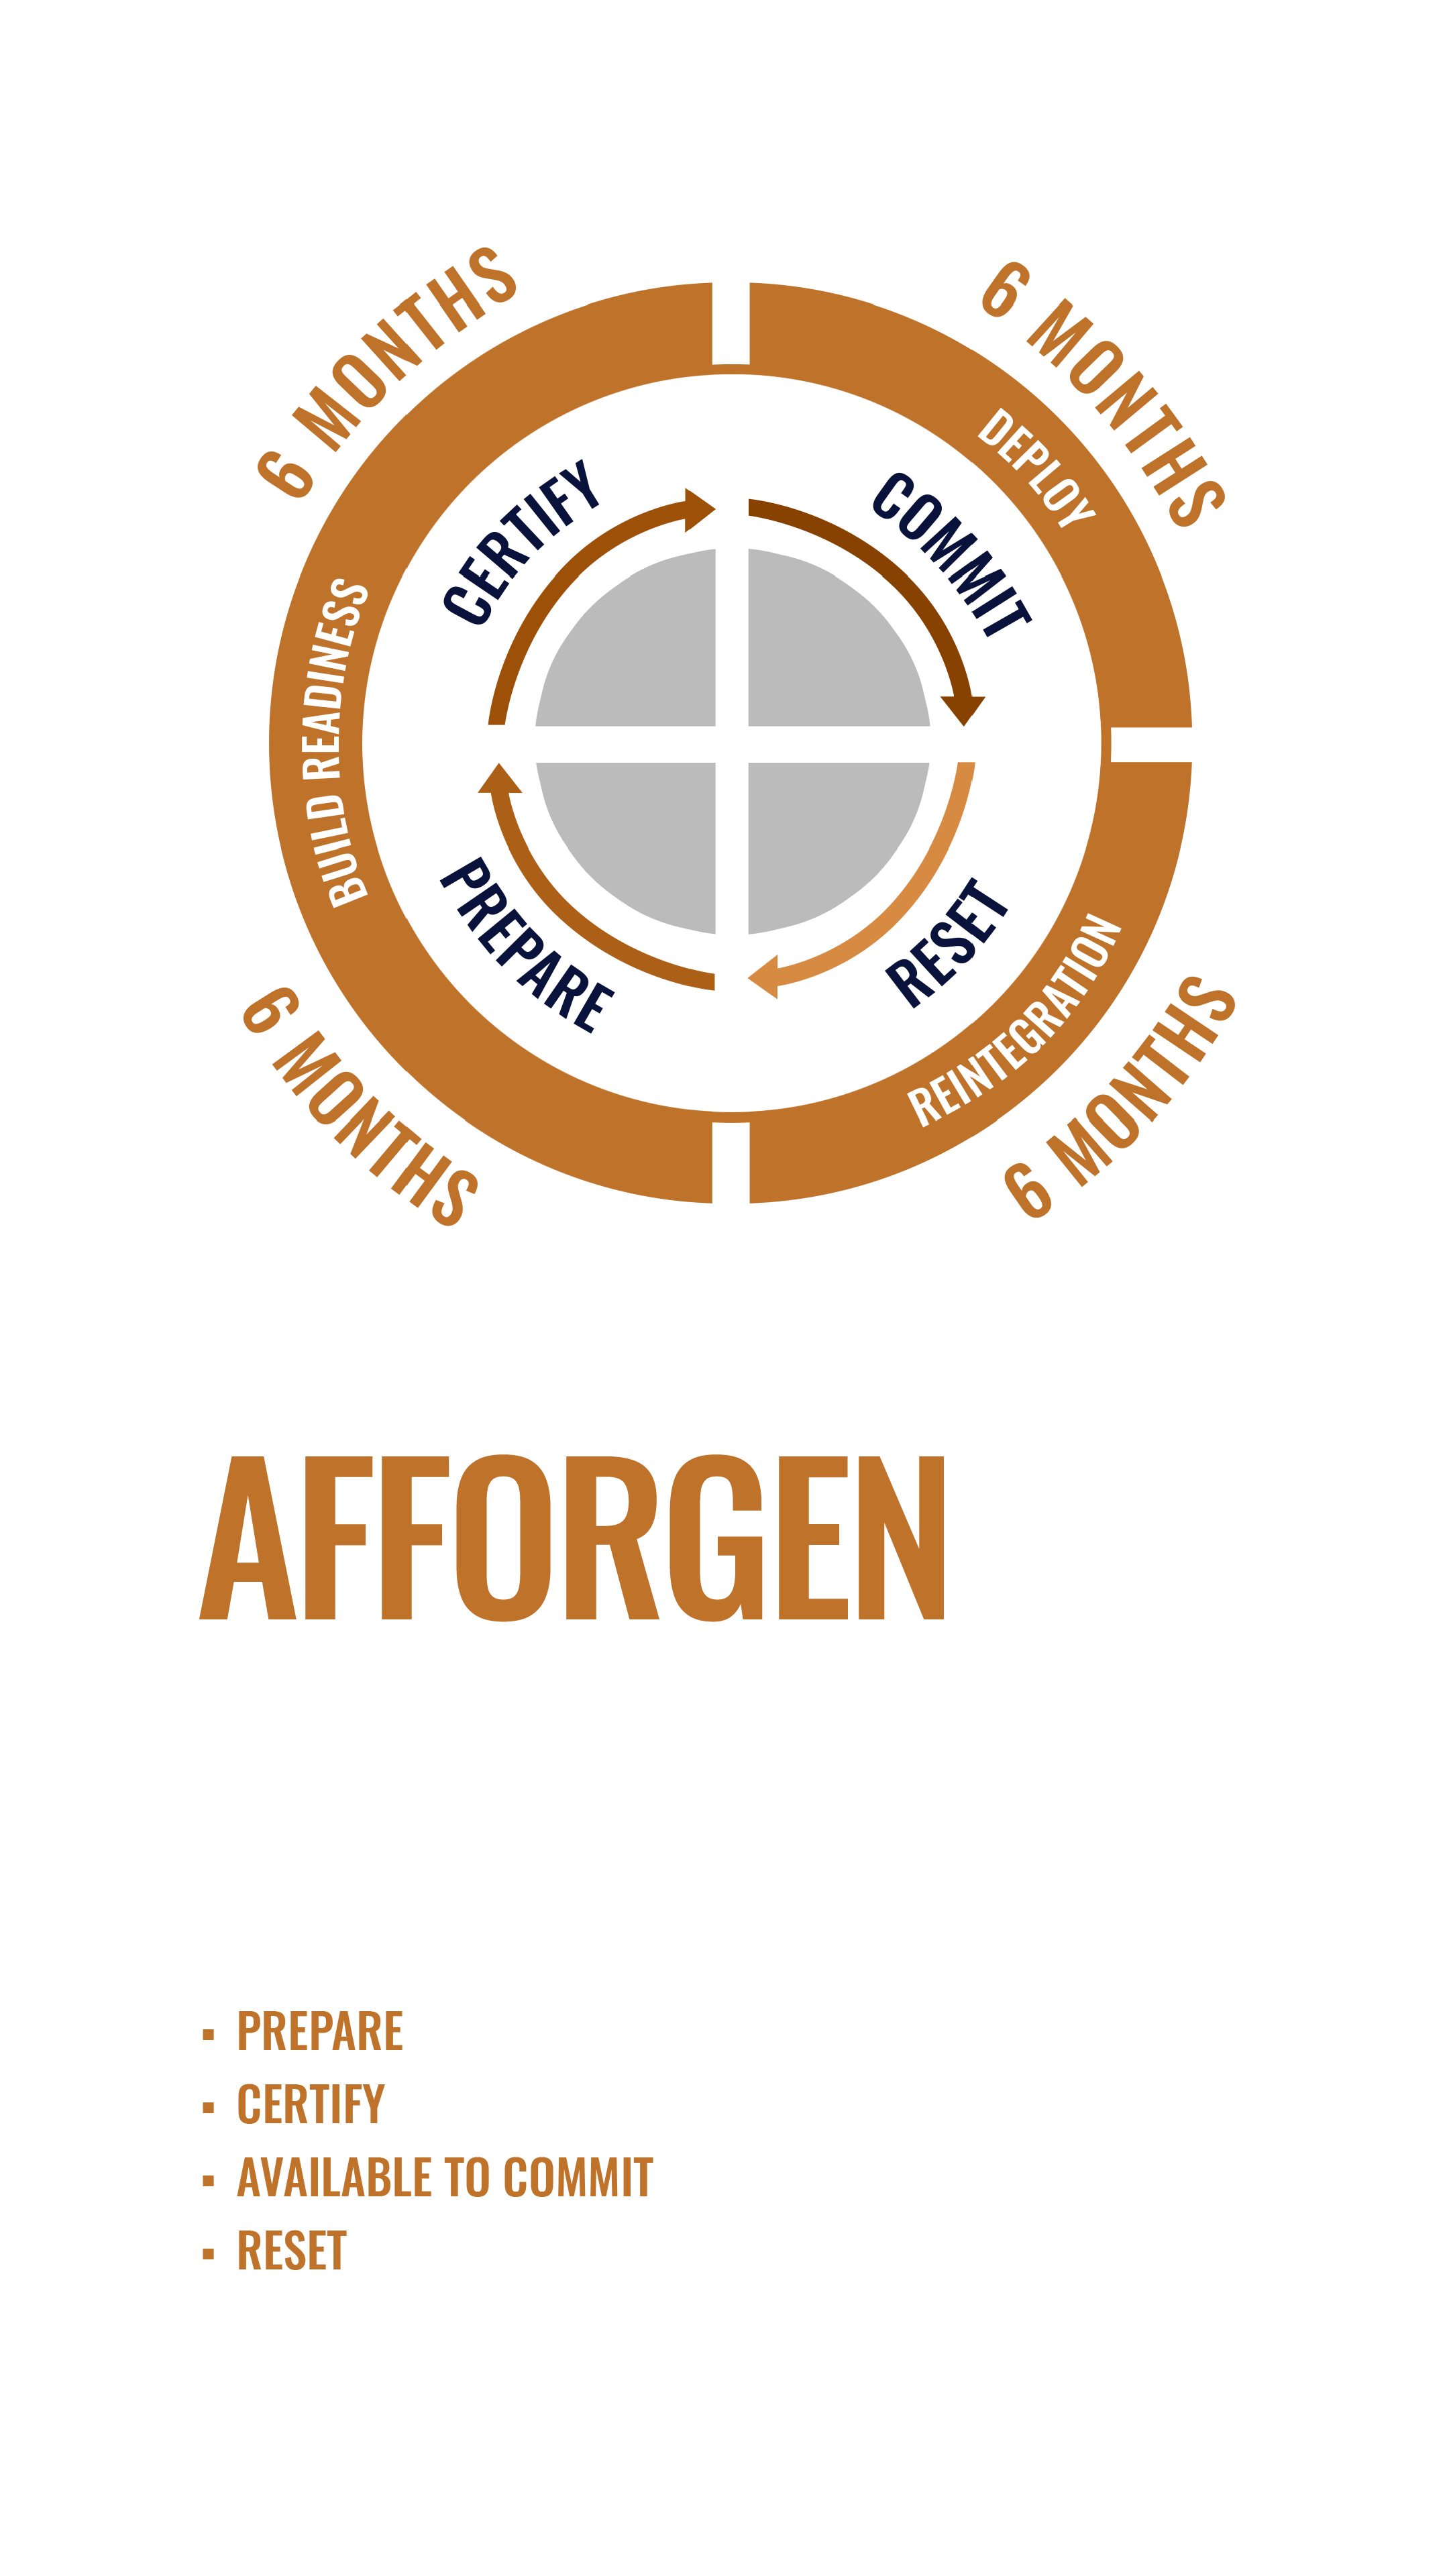 Drivers For Change: Air Force Force Generation